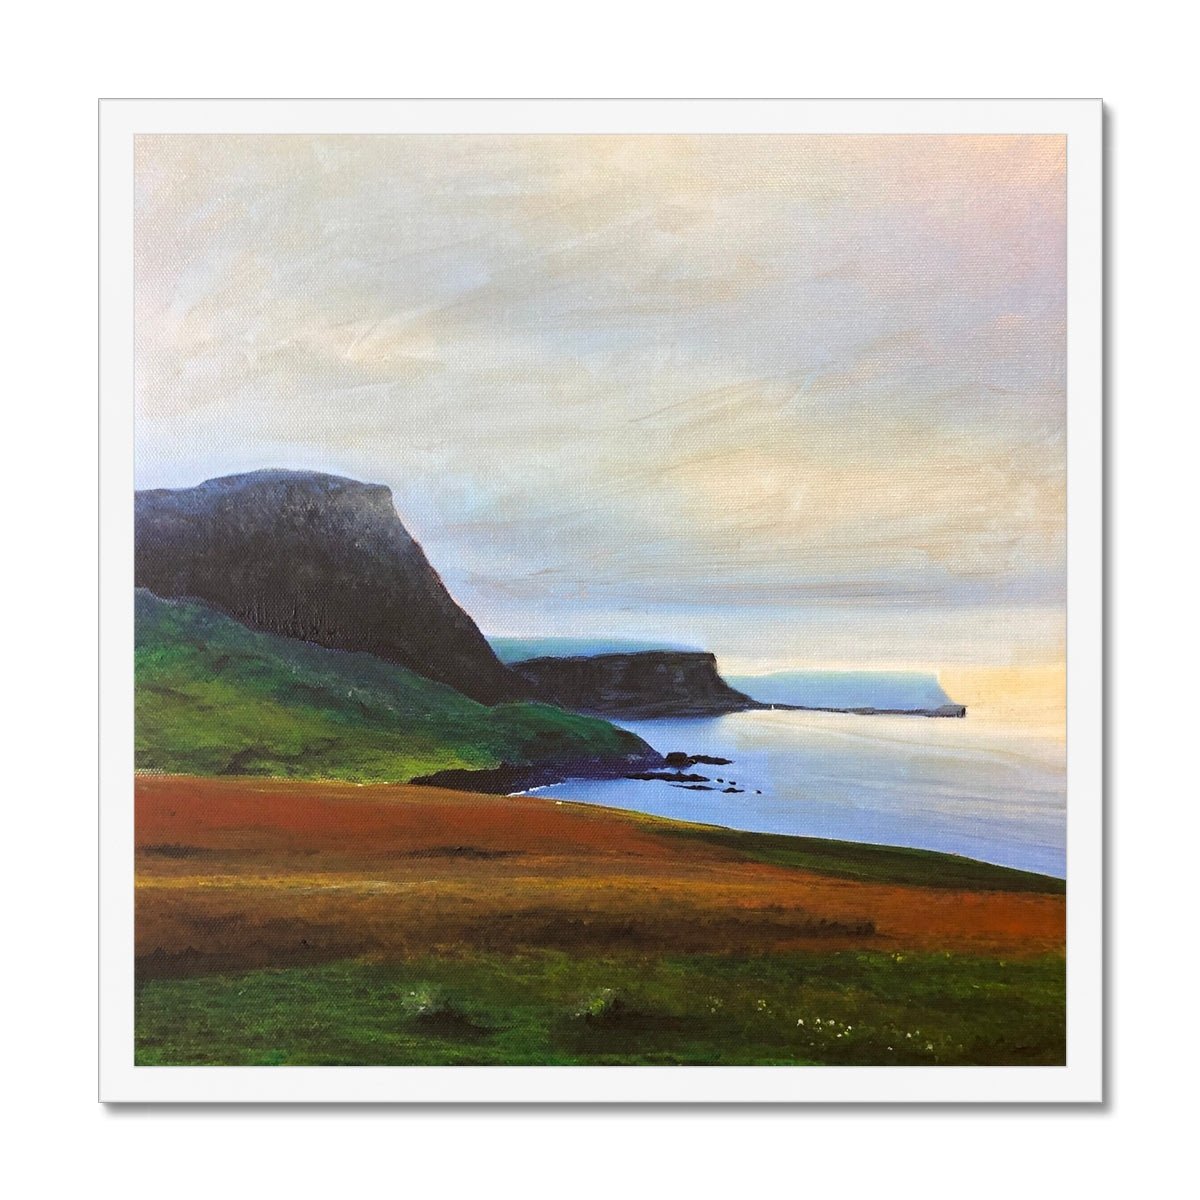 Neist Point Cliffs Skye Painting | Framed Prints From Scotland-Framed Prints-Skye Art Gallery-20"x20"-White Frame-Paintings, Prints, Homeware, Art Gifts From Scotland By Scottish Artist Kevin Hunter